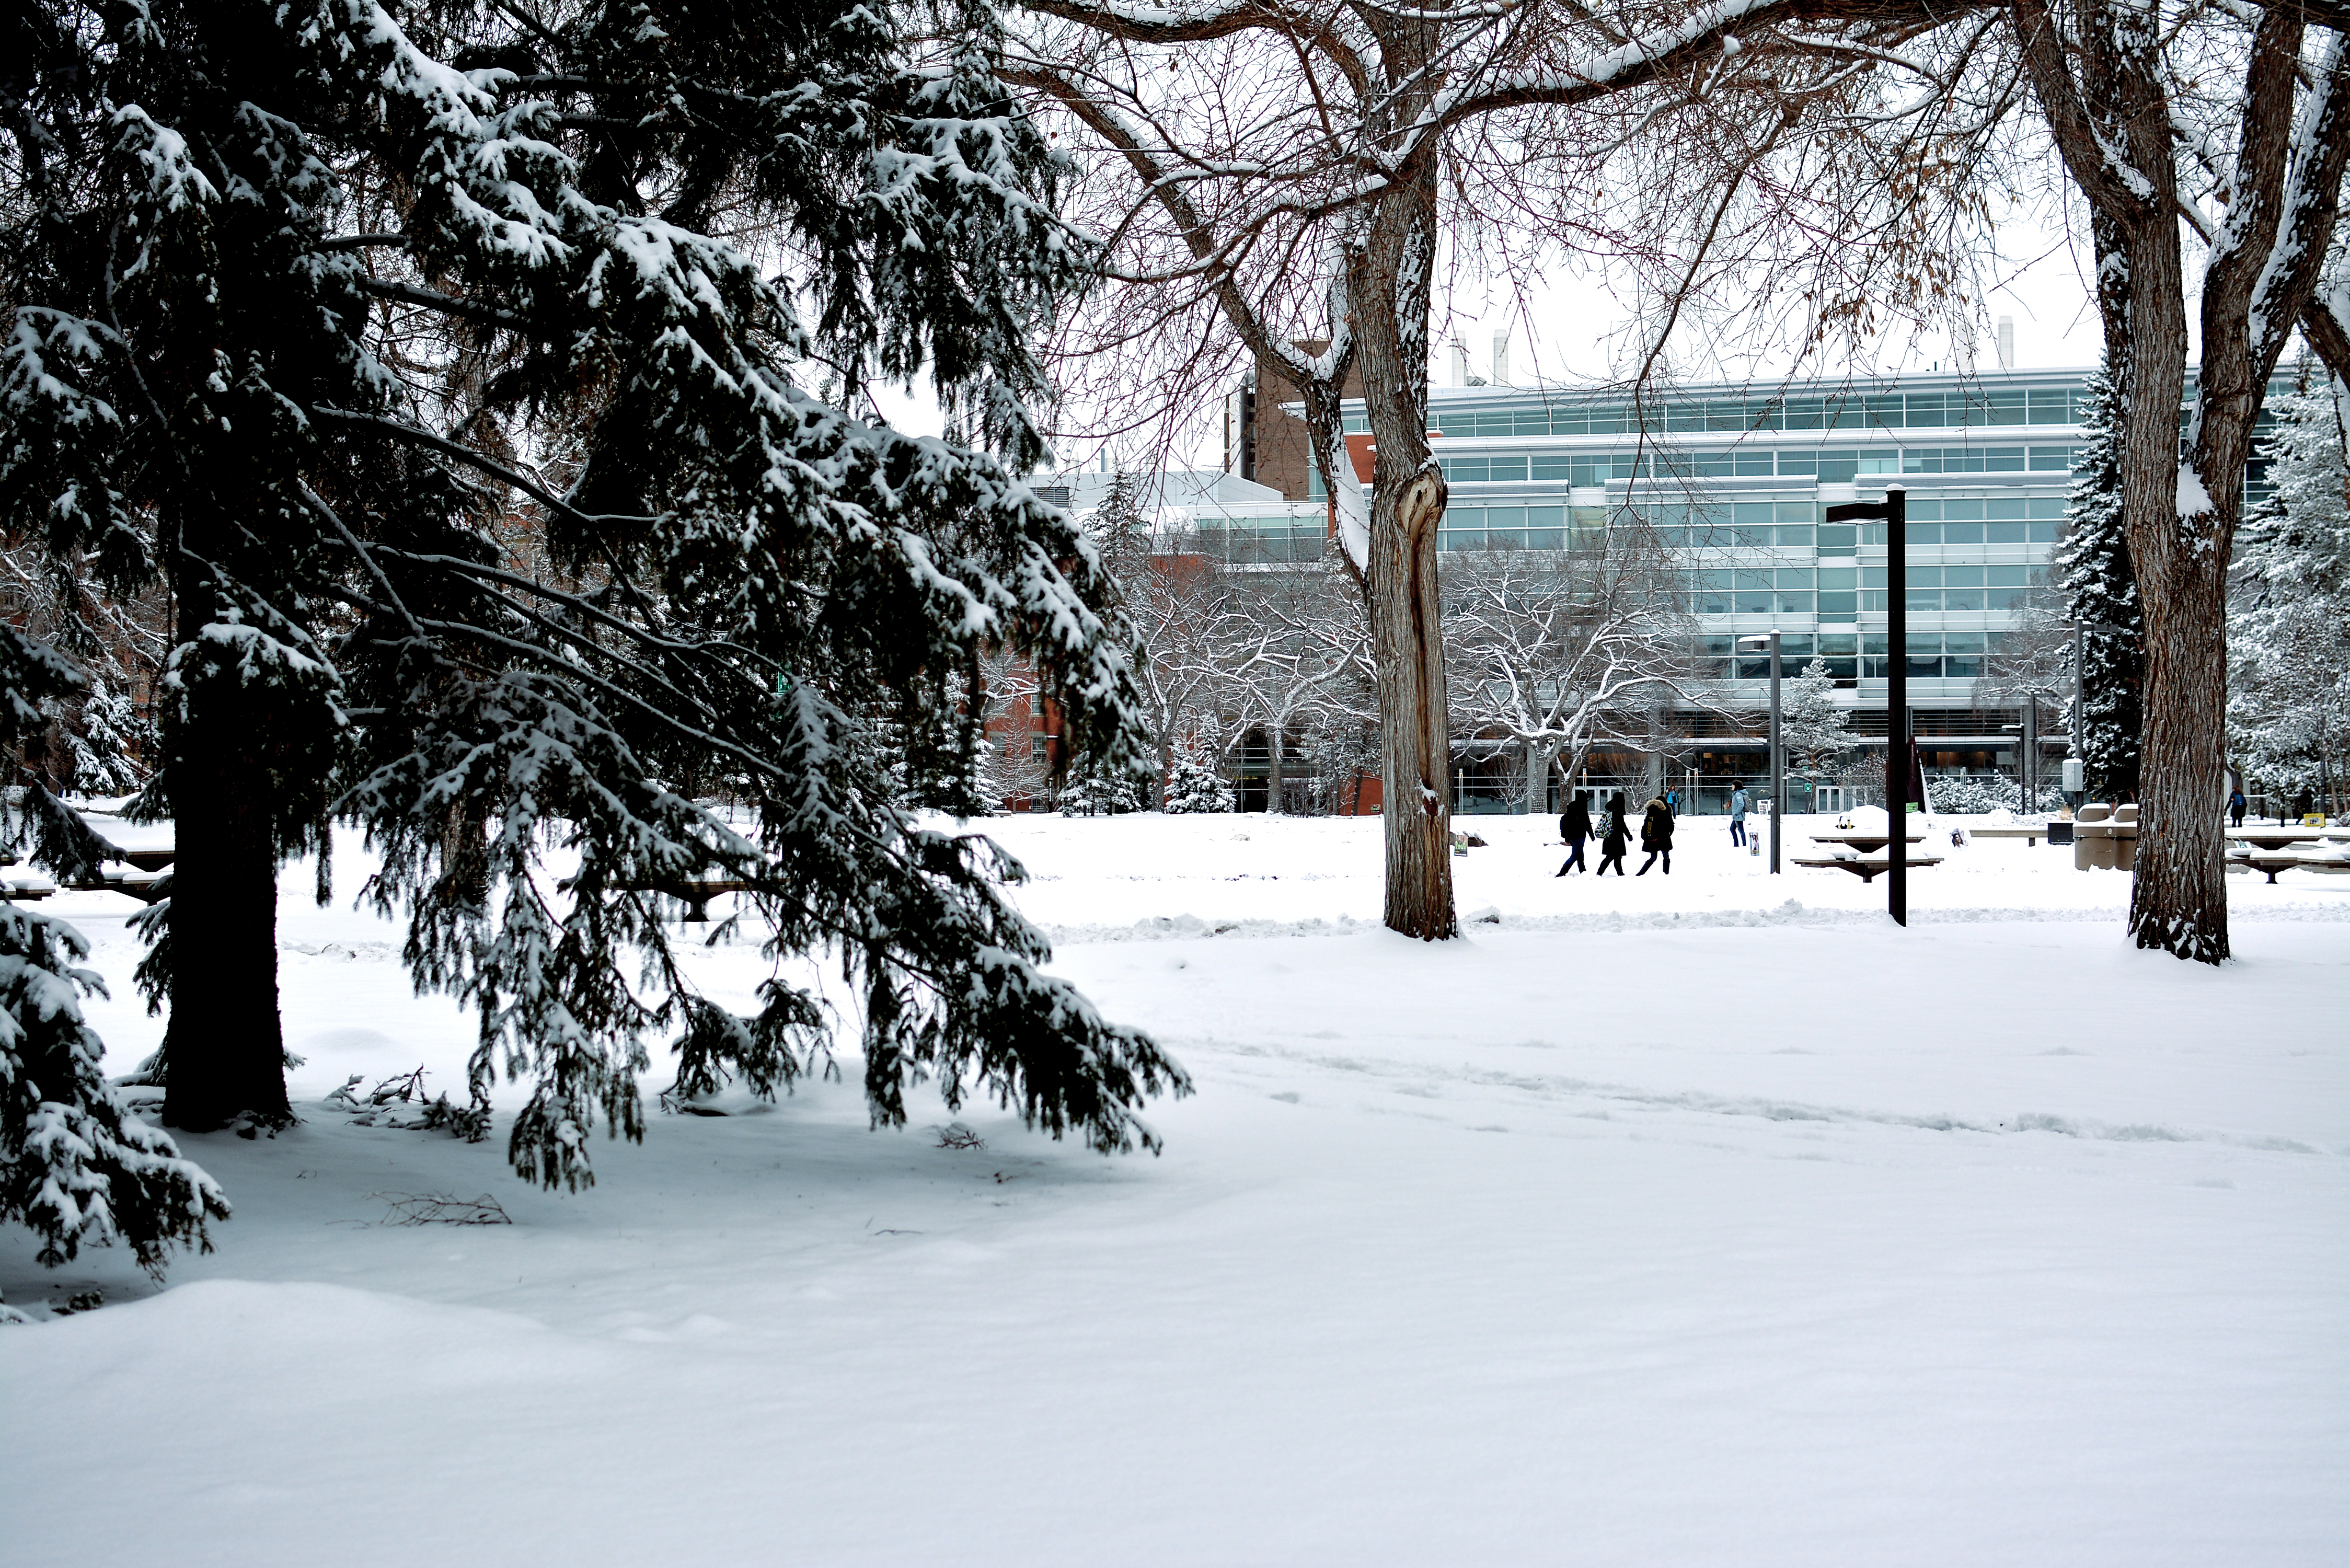 Main Quad covered in snow with CCIS in the background